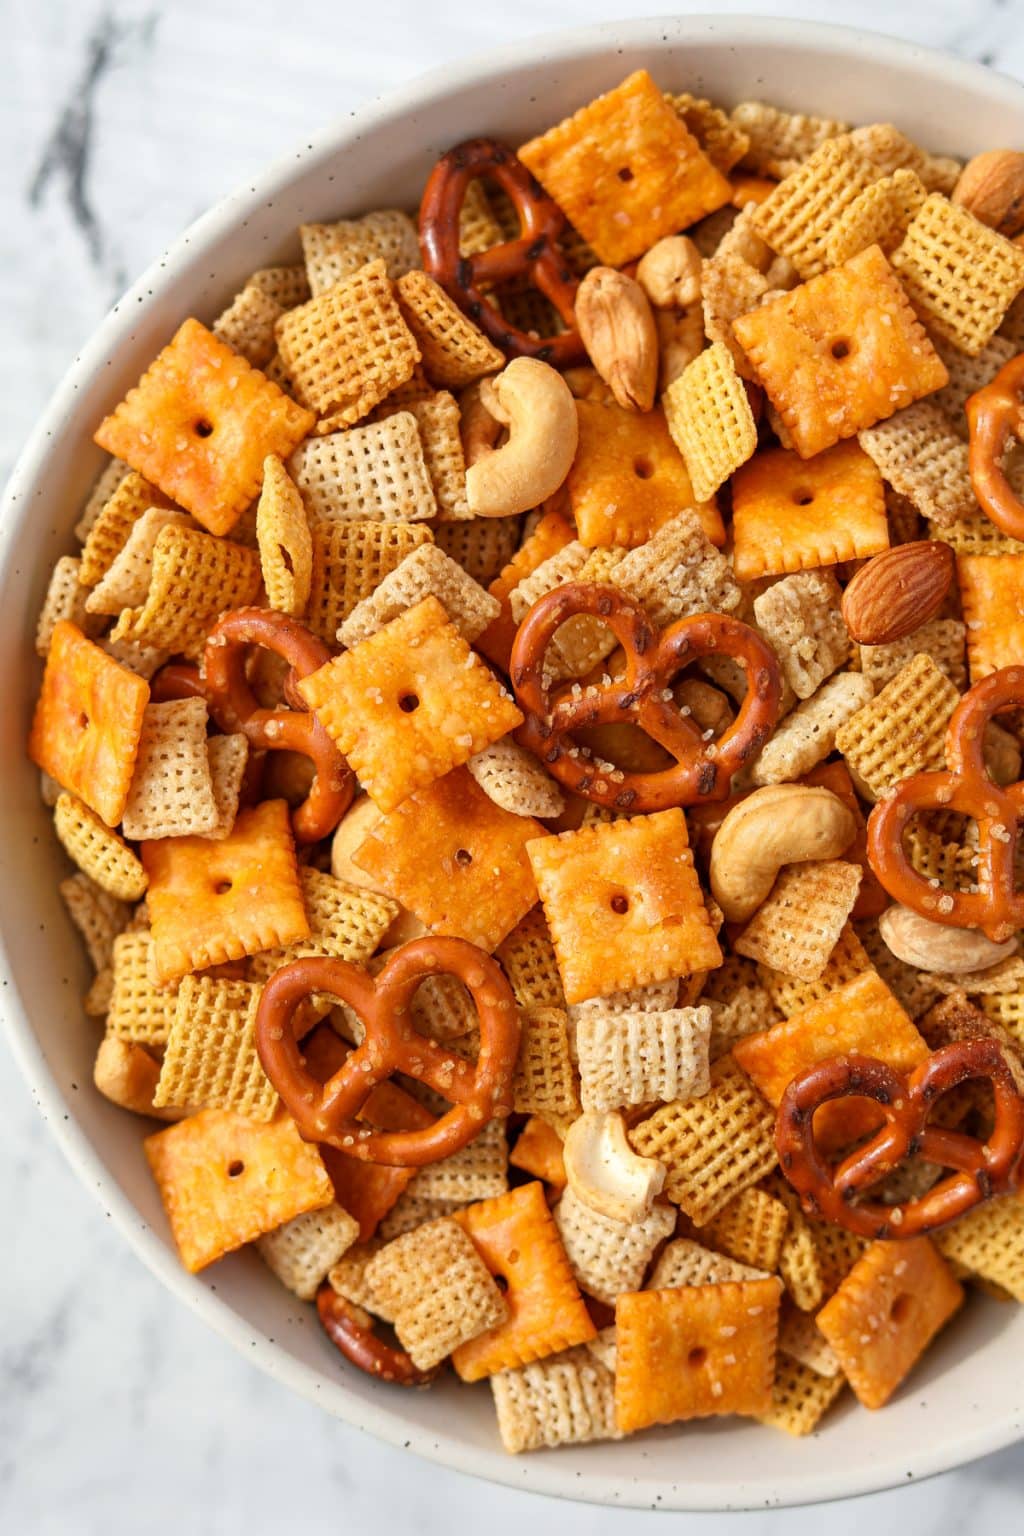 Homemade Chex Mix Recipe (Oven or Slow Cooker)